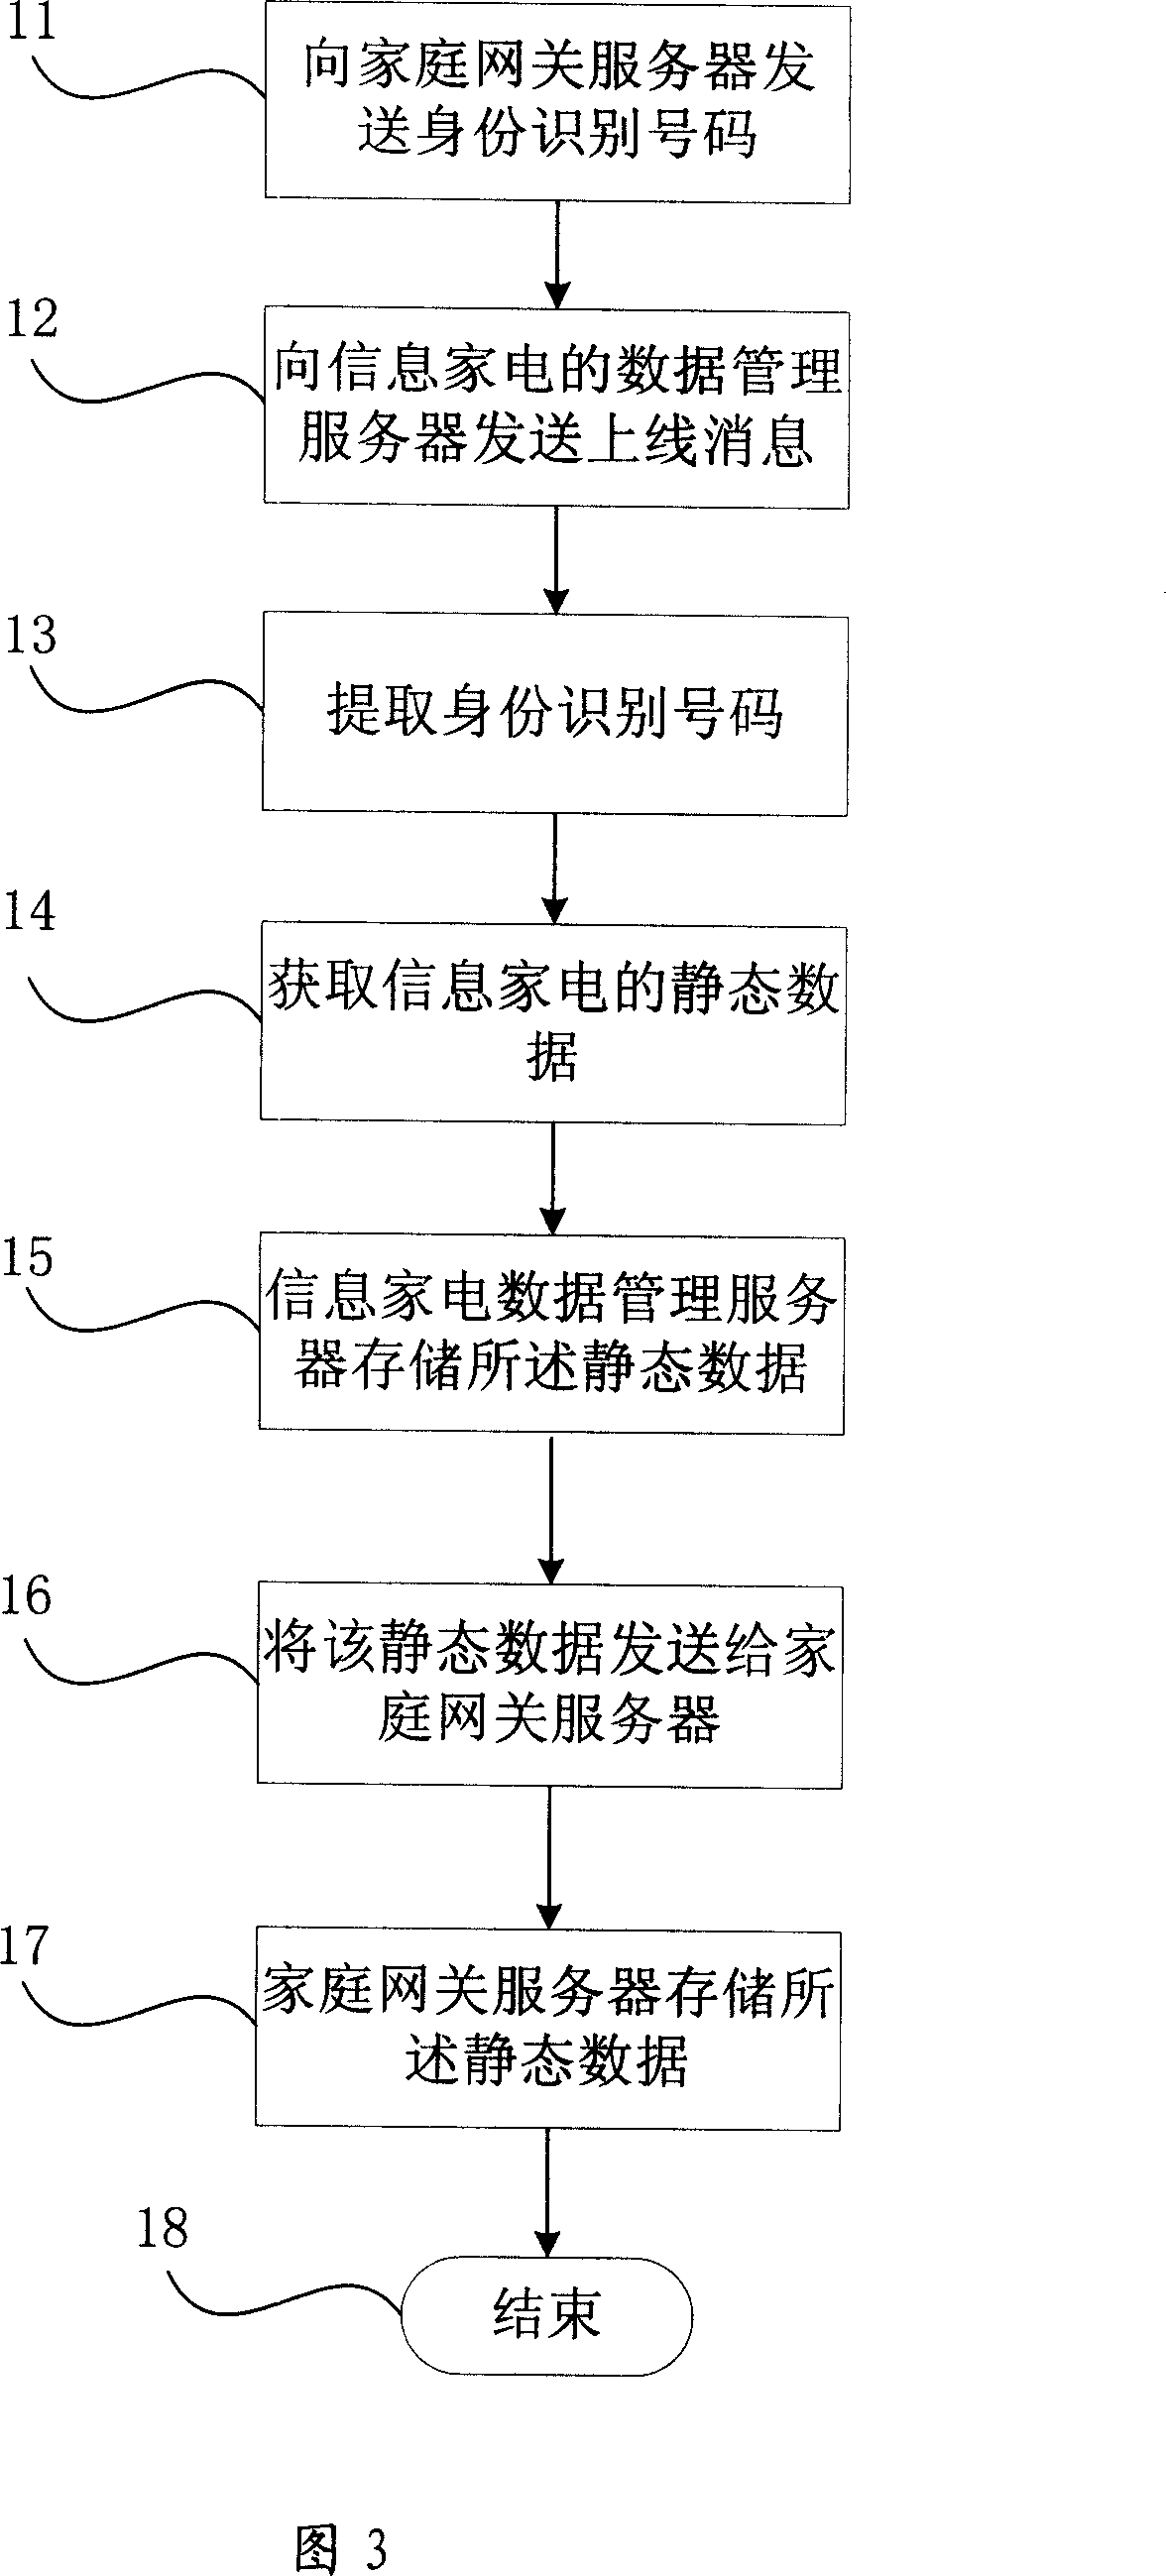 Data storage system of the information home electrical appliance and the data processing method